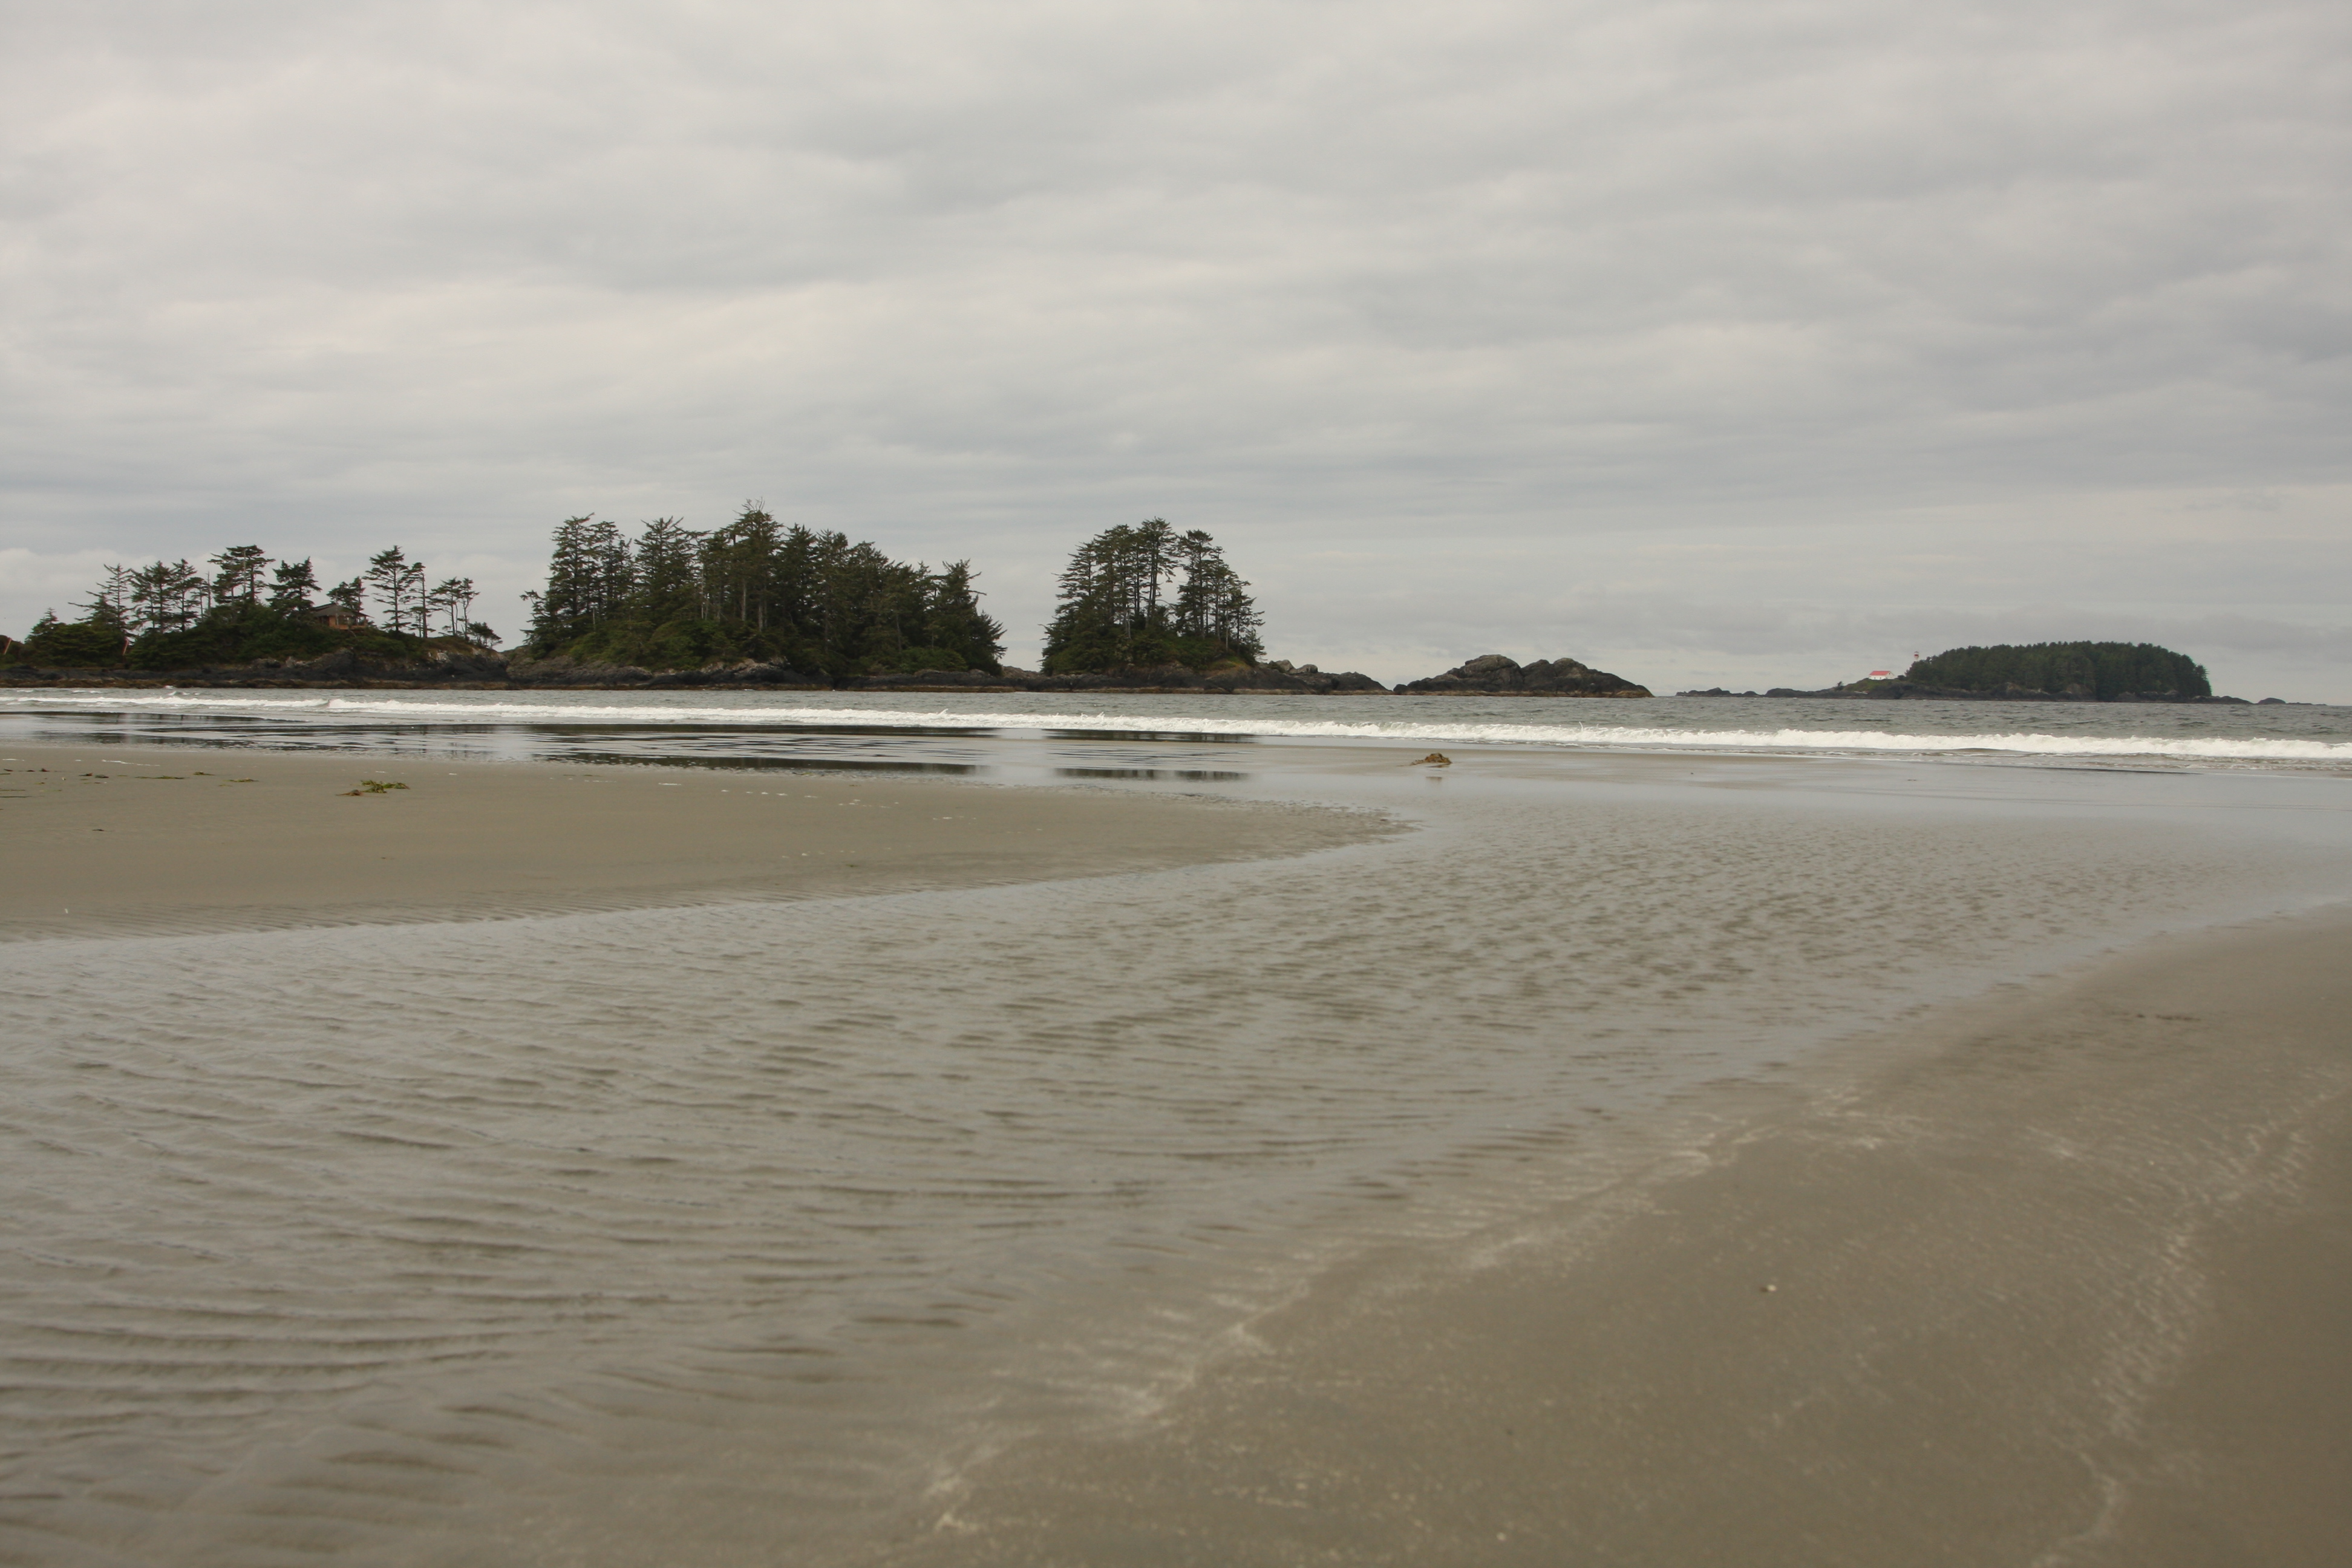 view of the Beach and the Ocean in Tofino